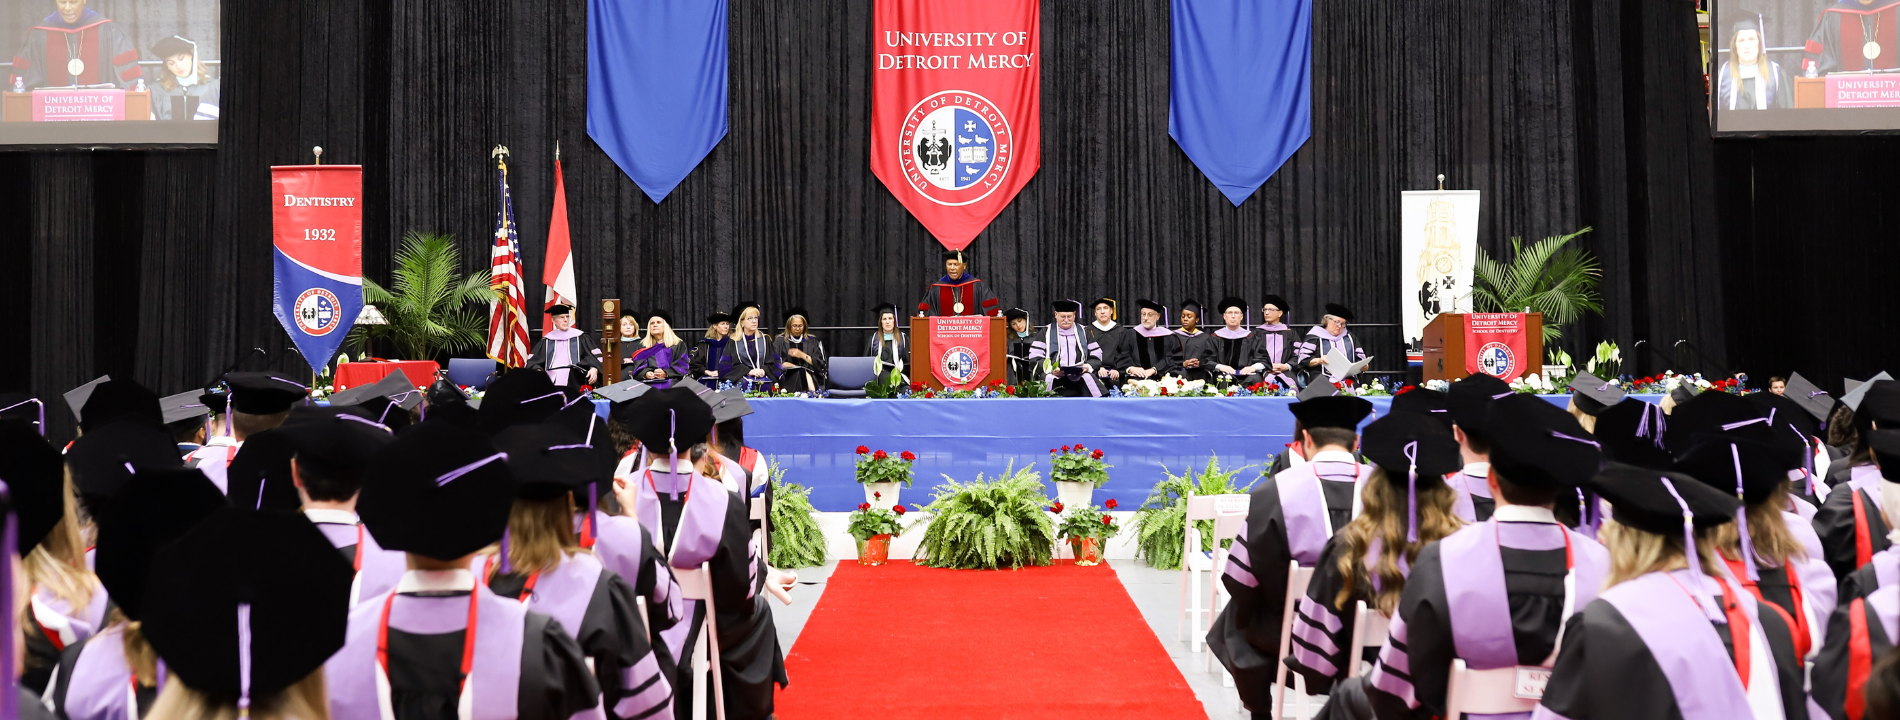 A wide view of a Dental Commencement Ceremony.